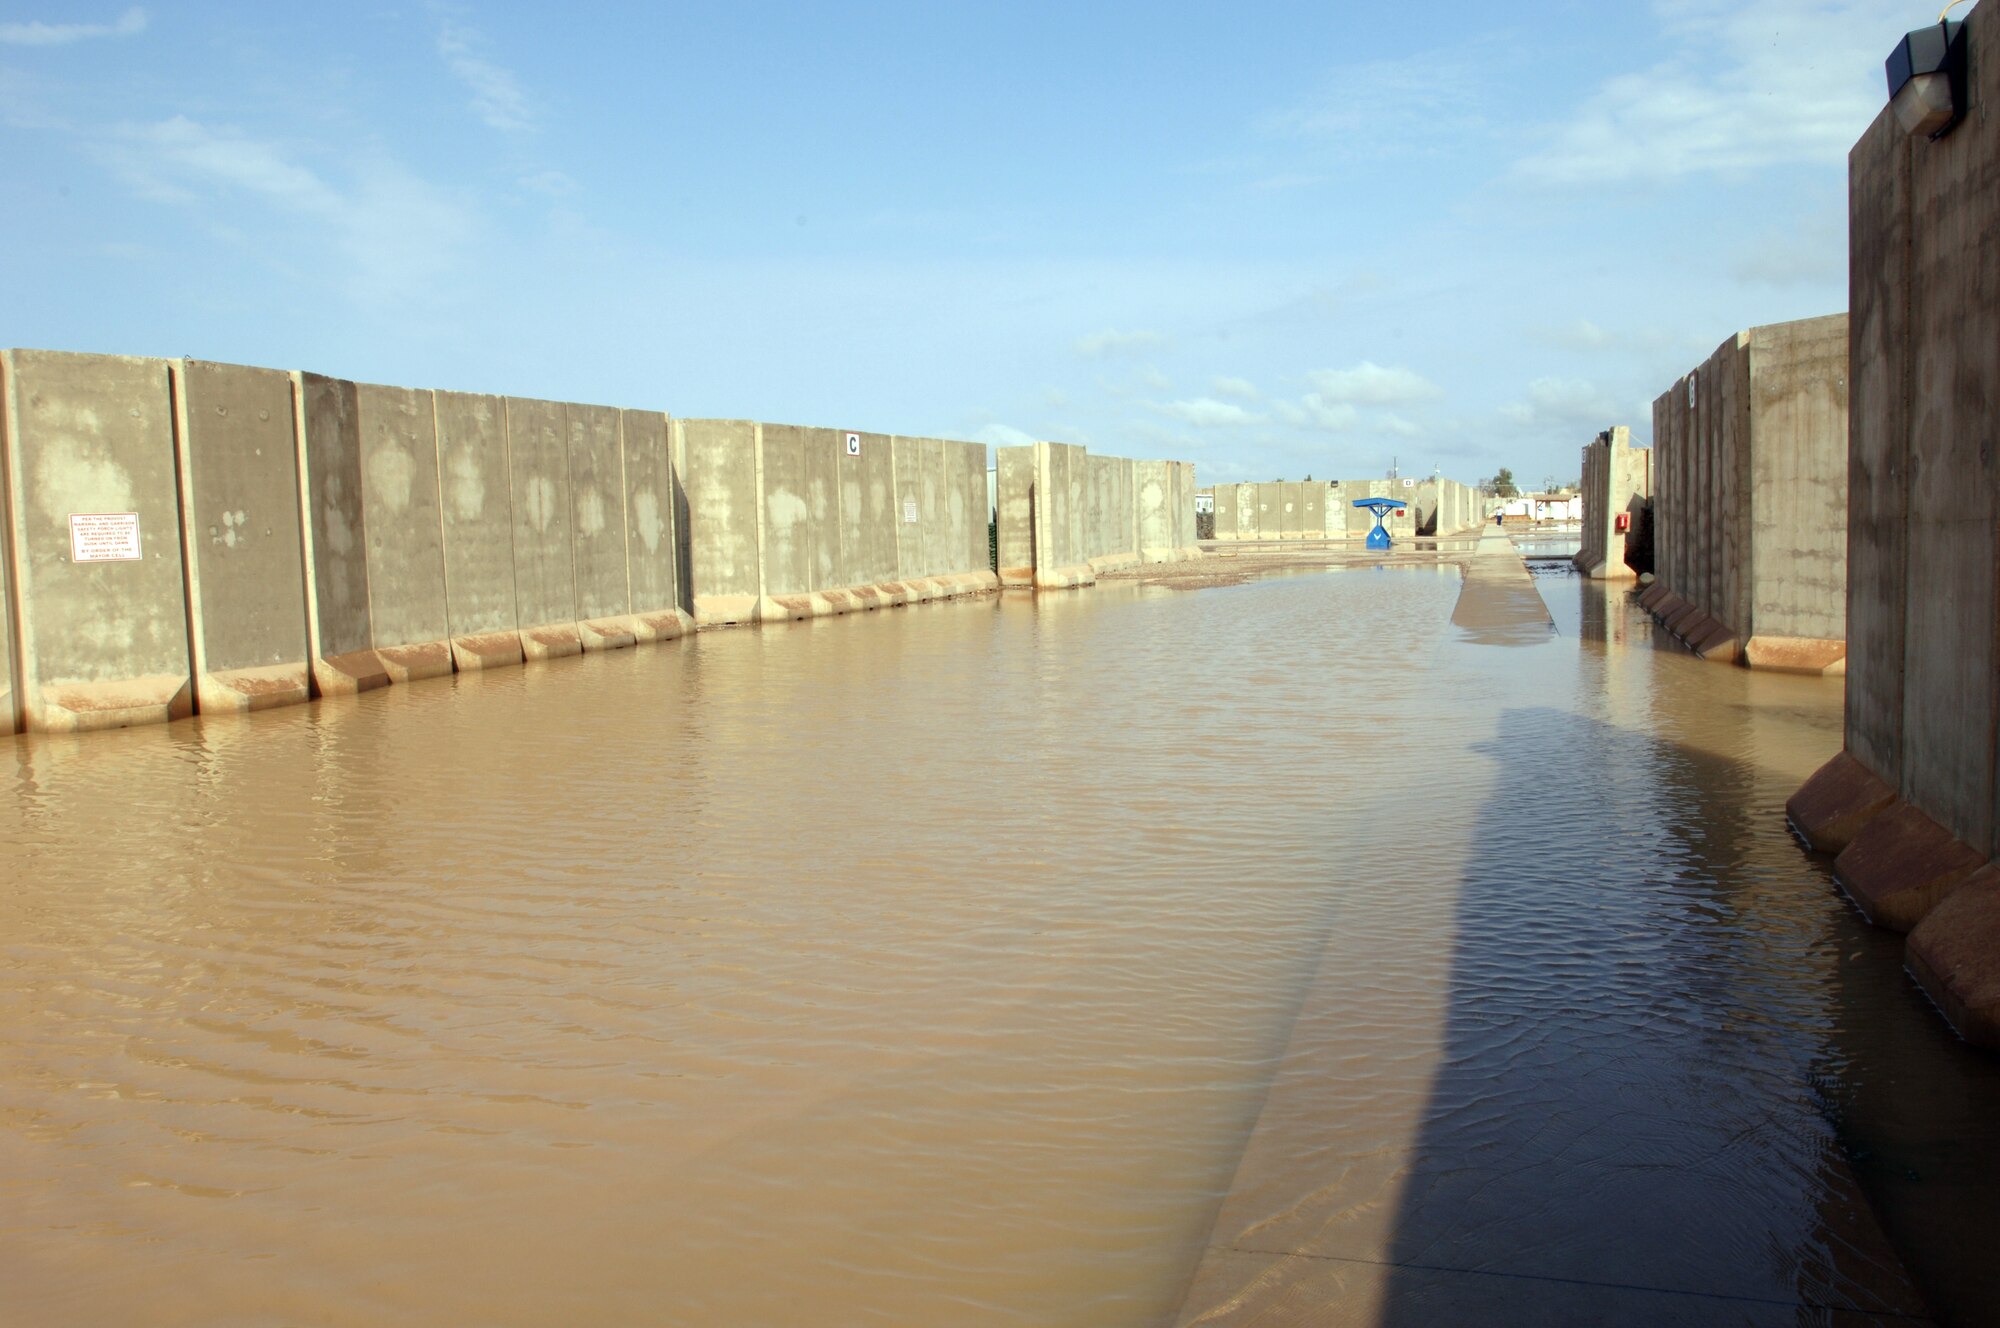 Water floods a housing area at Joint Base Balad, Iraq, Oct. 25. Because rain is infrequent in Iraq, when it does rain, the hardened ground soaks up little water. (U.S. Air Force photo/Tech. Sgt. Erik Gudmundson)